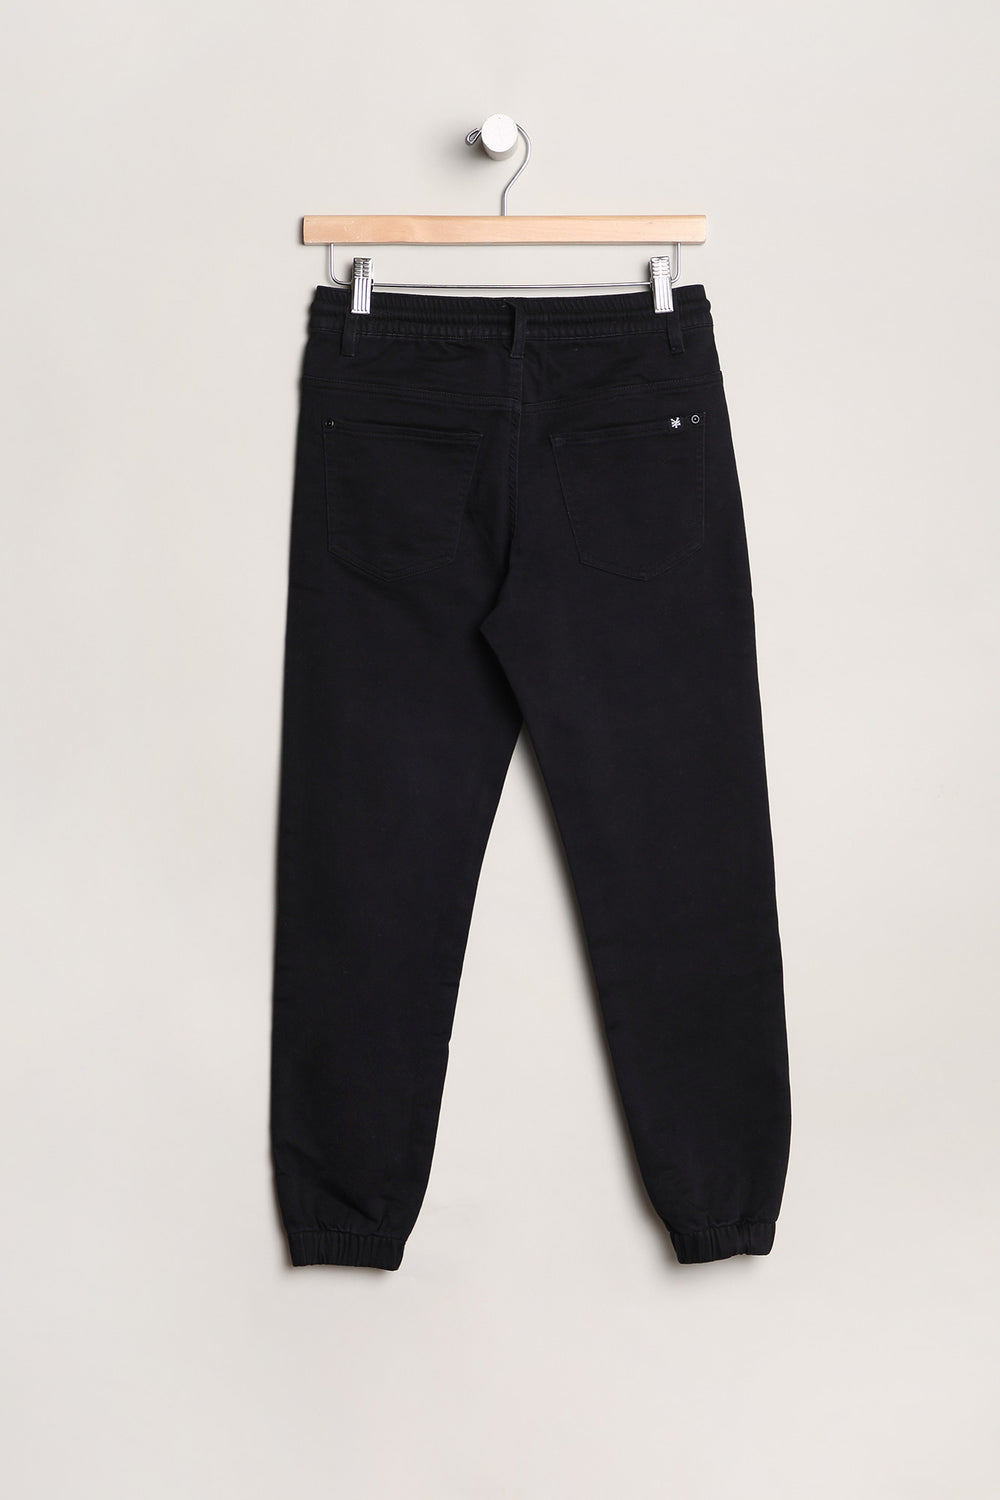 Zoo York Youth Relaxed Soft Denim Jogger Black